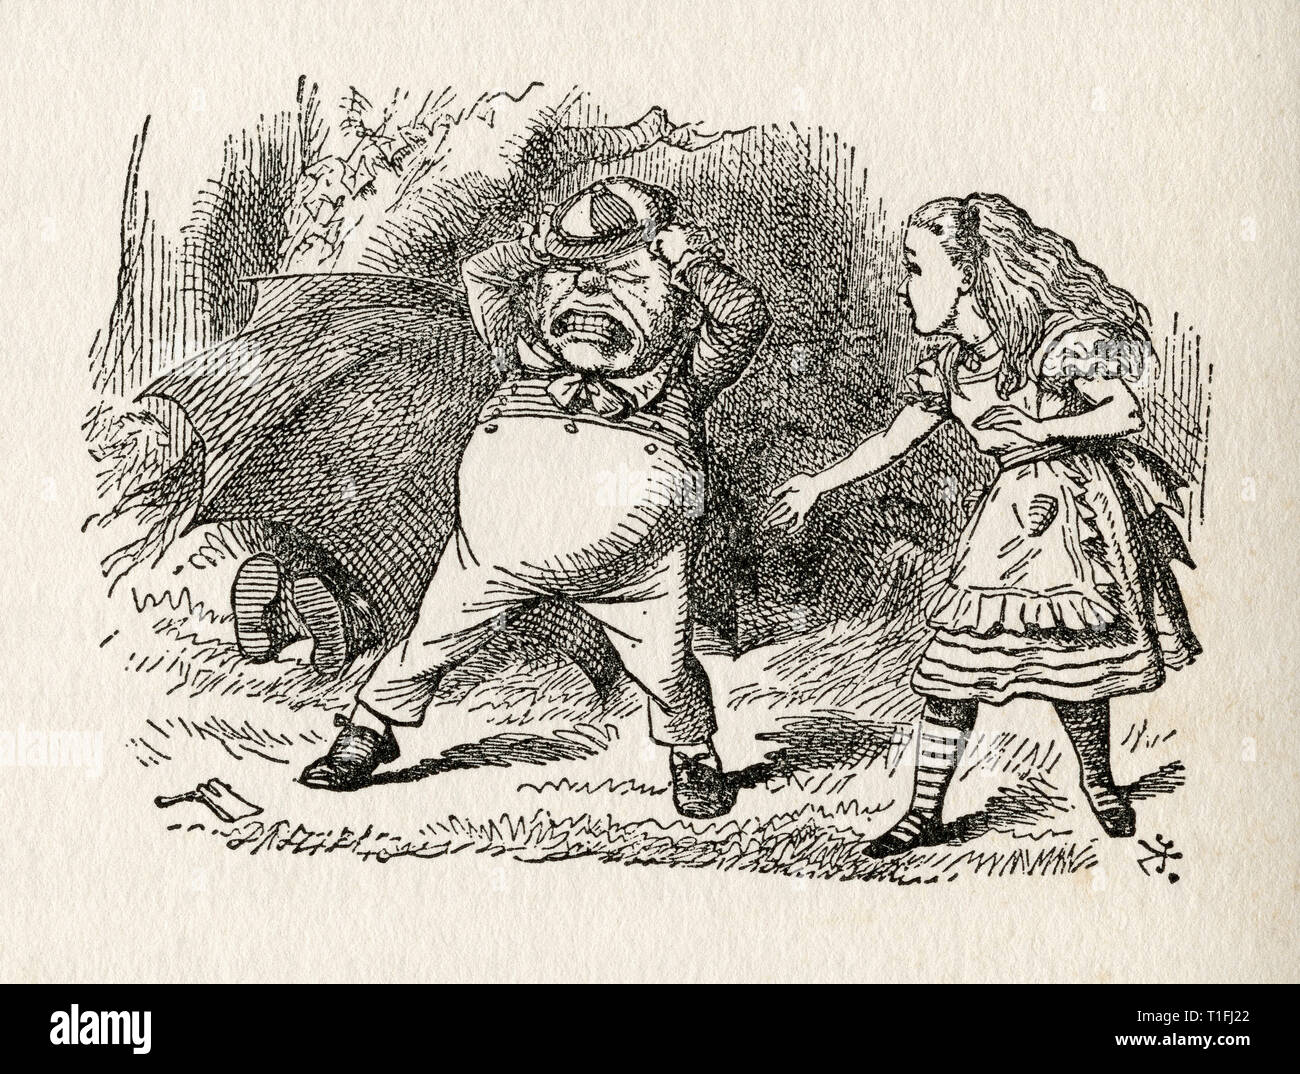 Alice and Tweedledum.  Illustration by Sir John Tenniel, (1820 - 1914).  From the book Through the Looking Glass and What Alice Found There, by Lewis Carroll, published London, 1912. Stock Photo